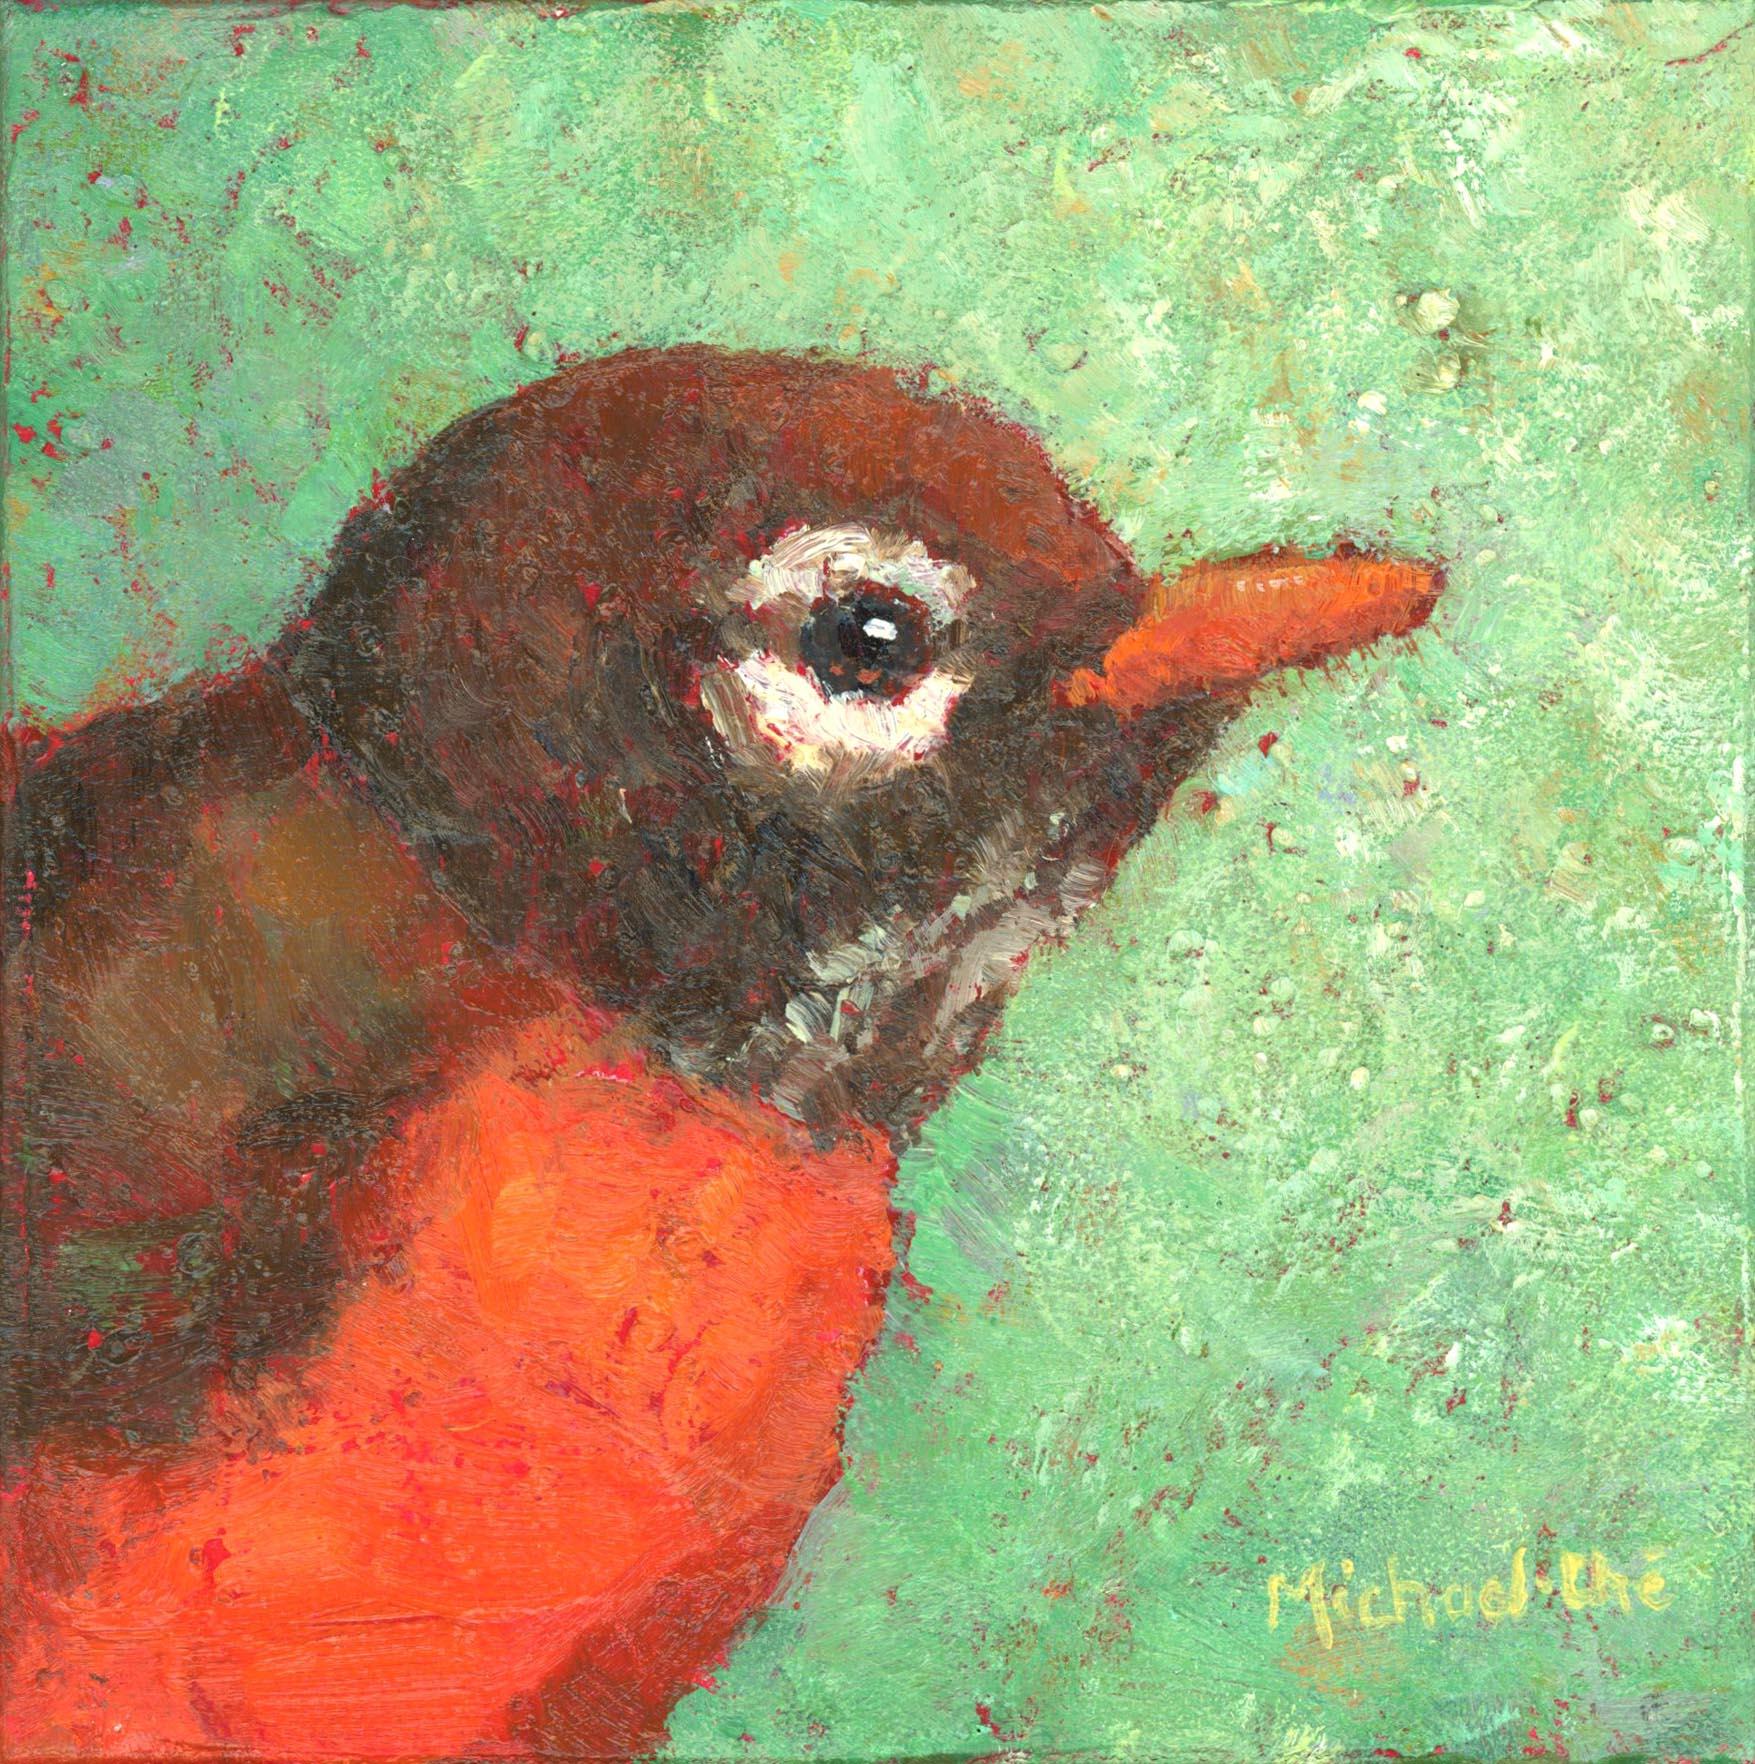 Michael-Che Swisher Figurative Painting - "To Sum It Up" Orange and brown bird on green canvas.